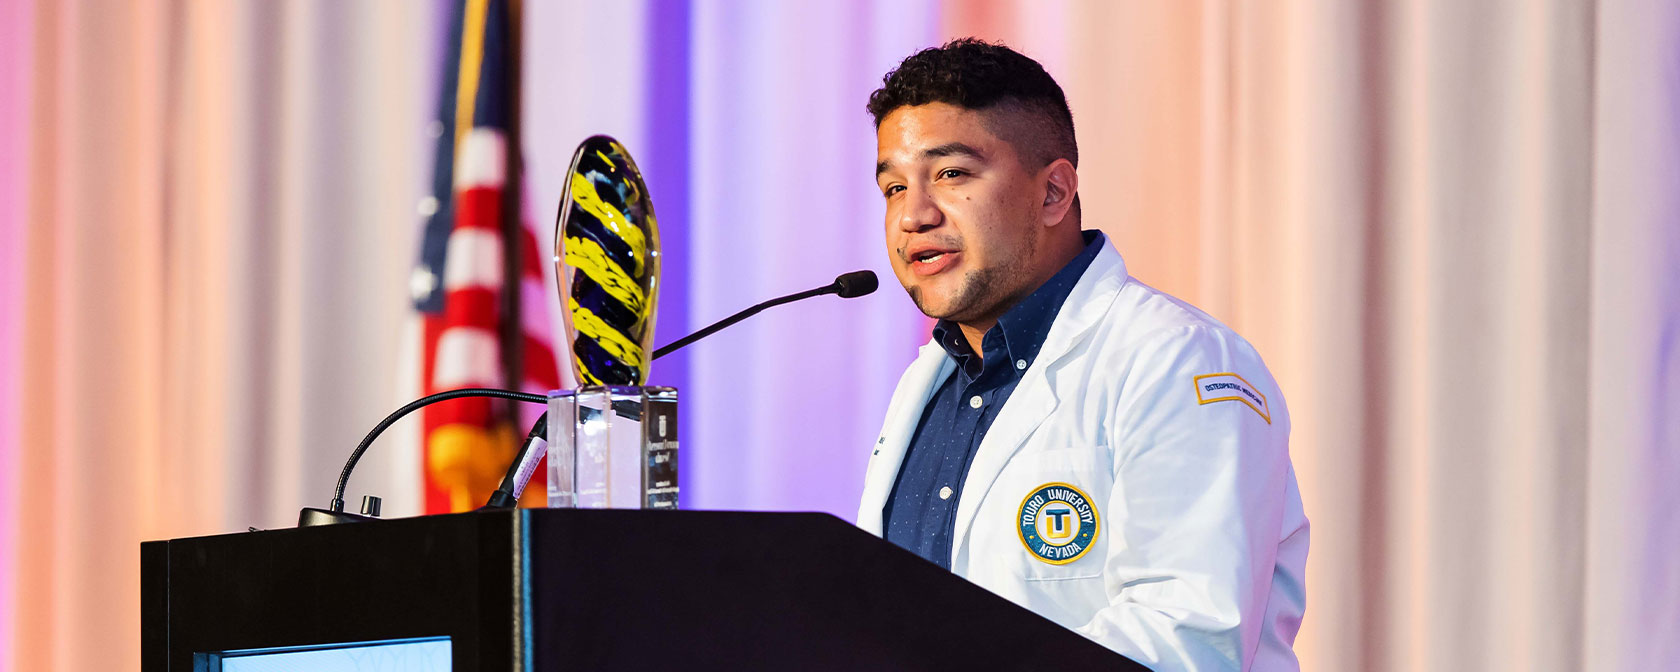 Medical student, Jose Parra, in his white coat, speaks at the podium during the Gala 2022 event.